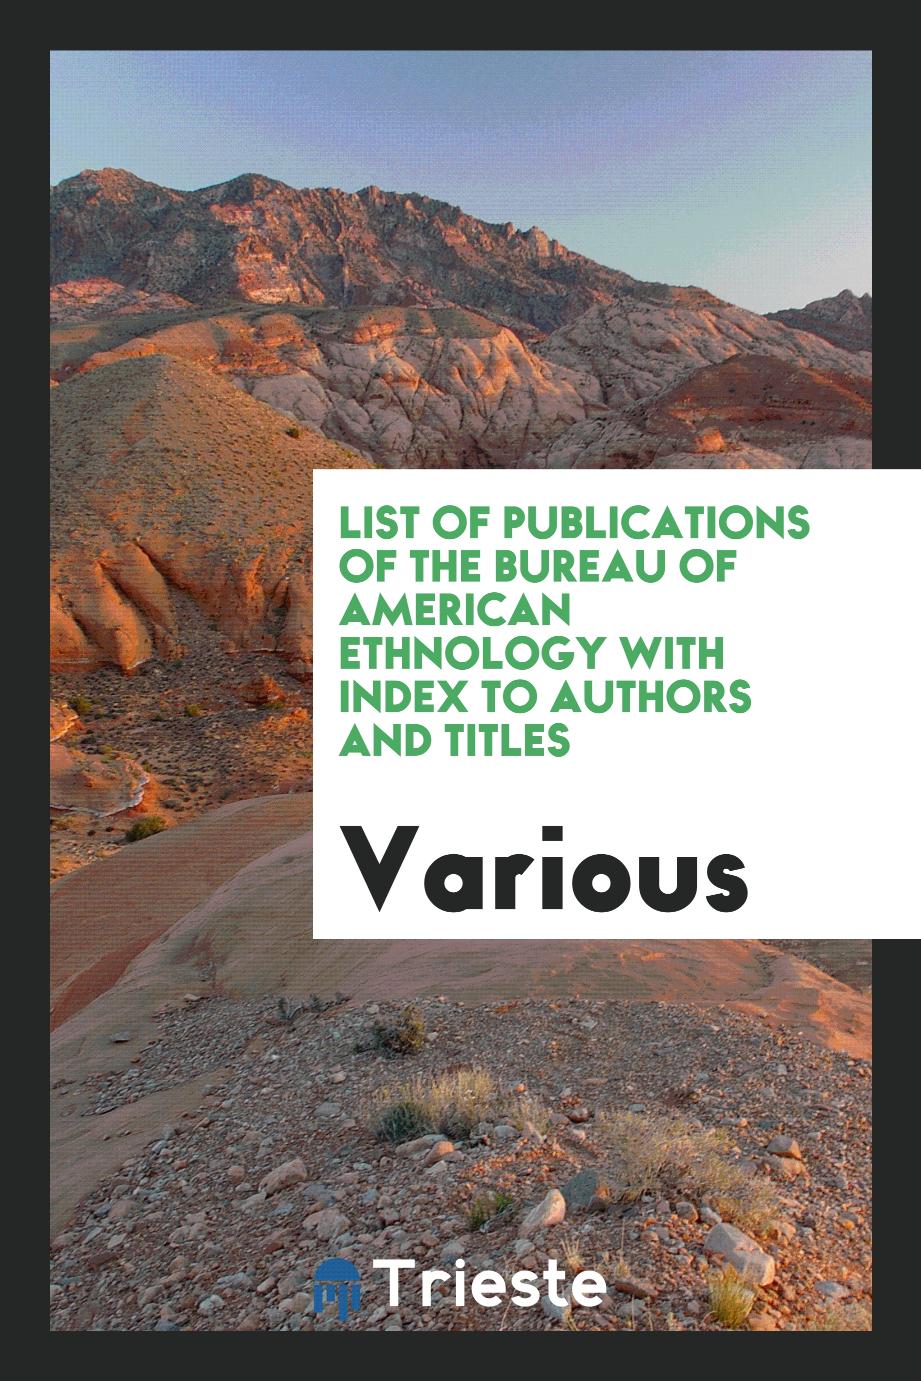 List of Publications of the Bureau of American Ethnology with Index to authors and titles